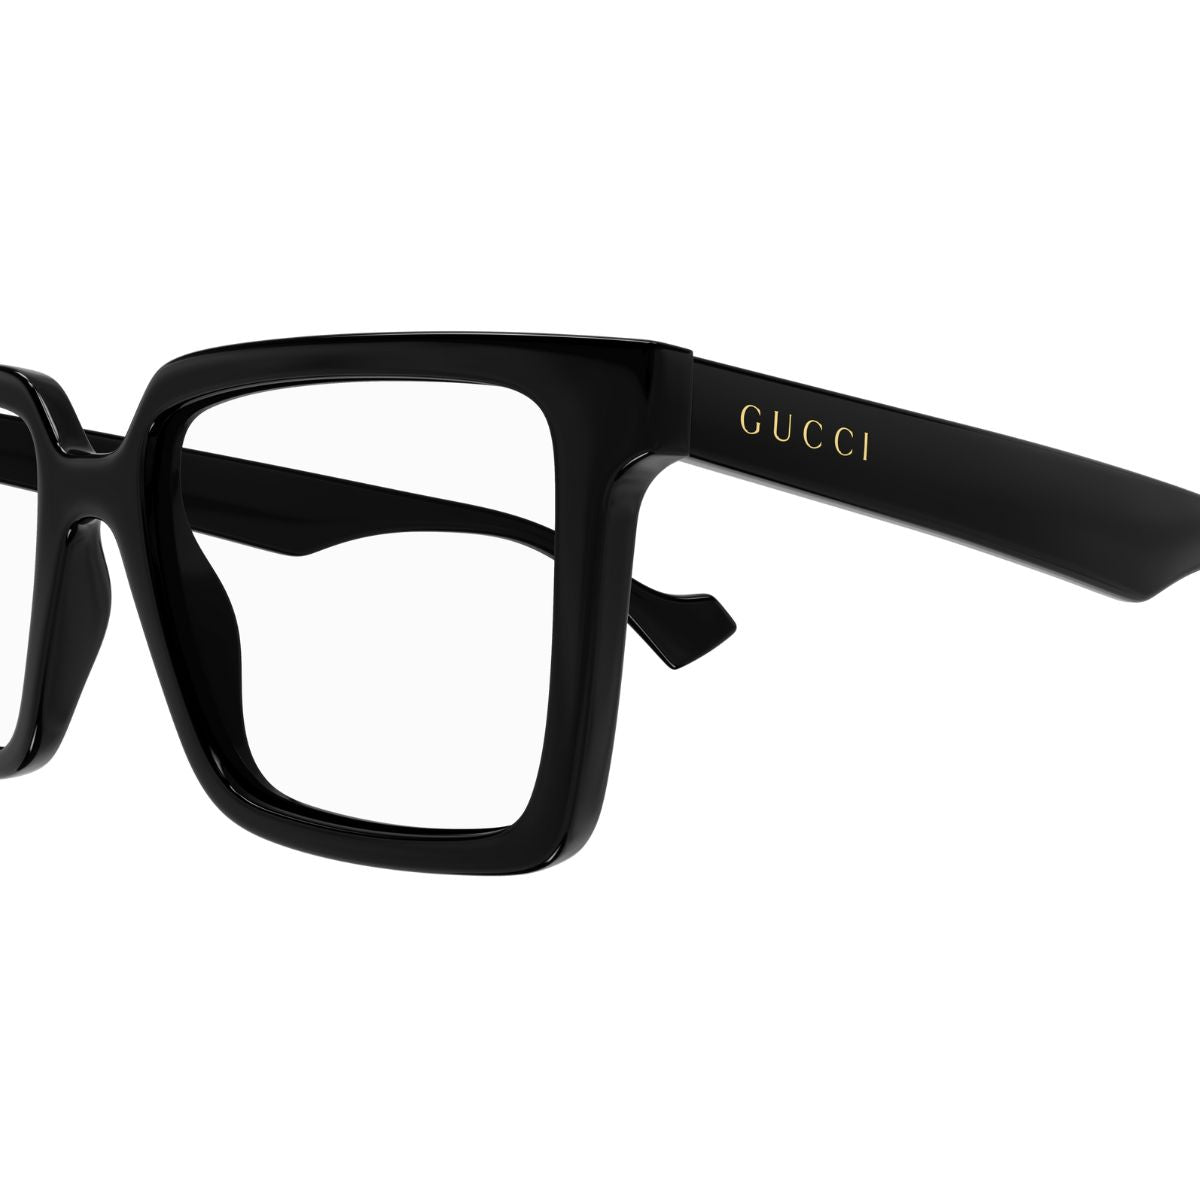 "Gucci 1540O 001 designer eyewear for men by Optorium, featuring luxurious Gucci sunglasses and frames."